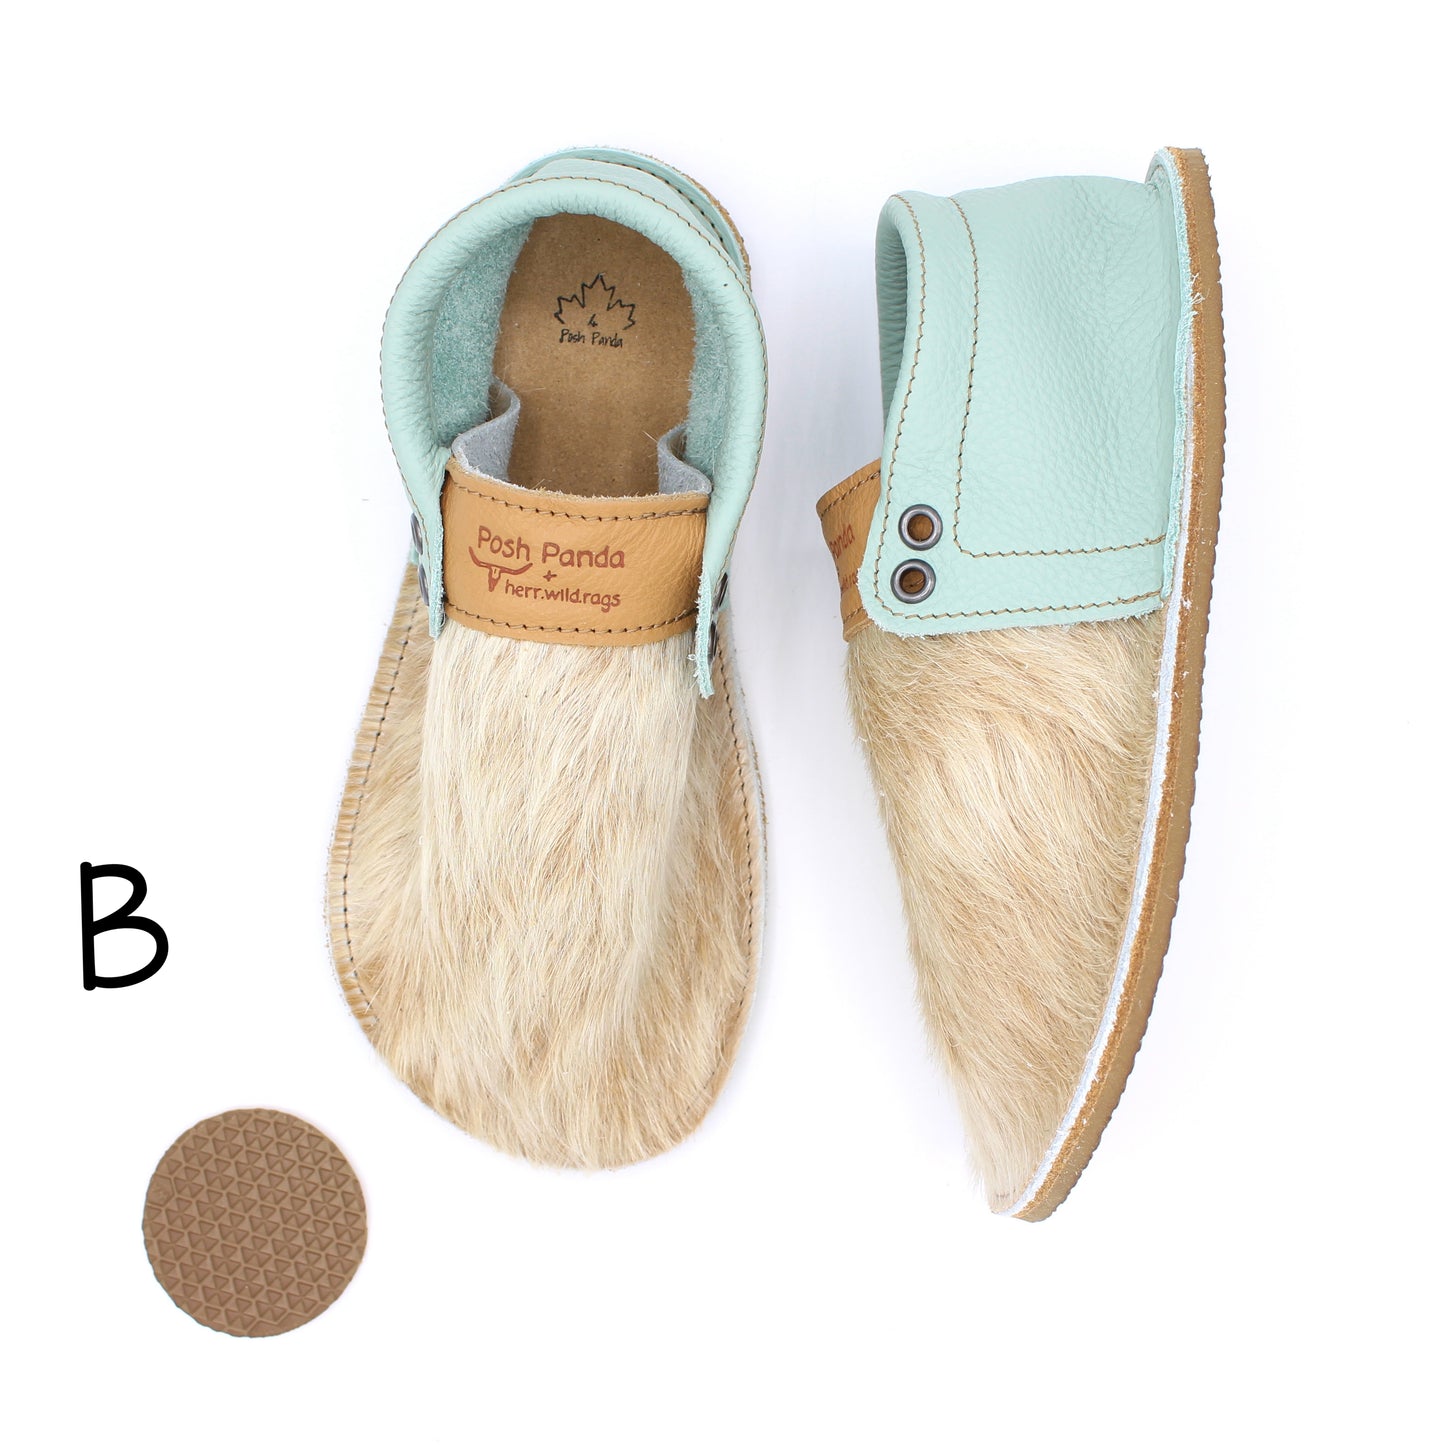 Hair Hide Mocs - YOUTH - Size 4 (4mm Sole)